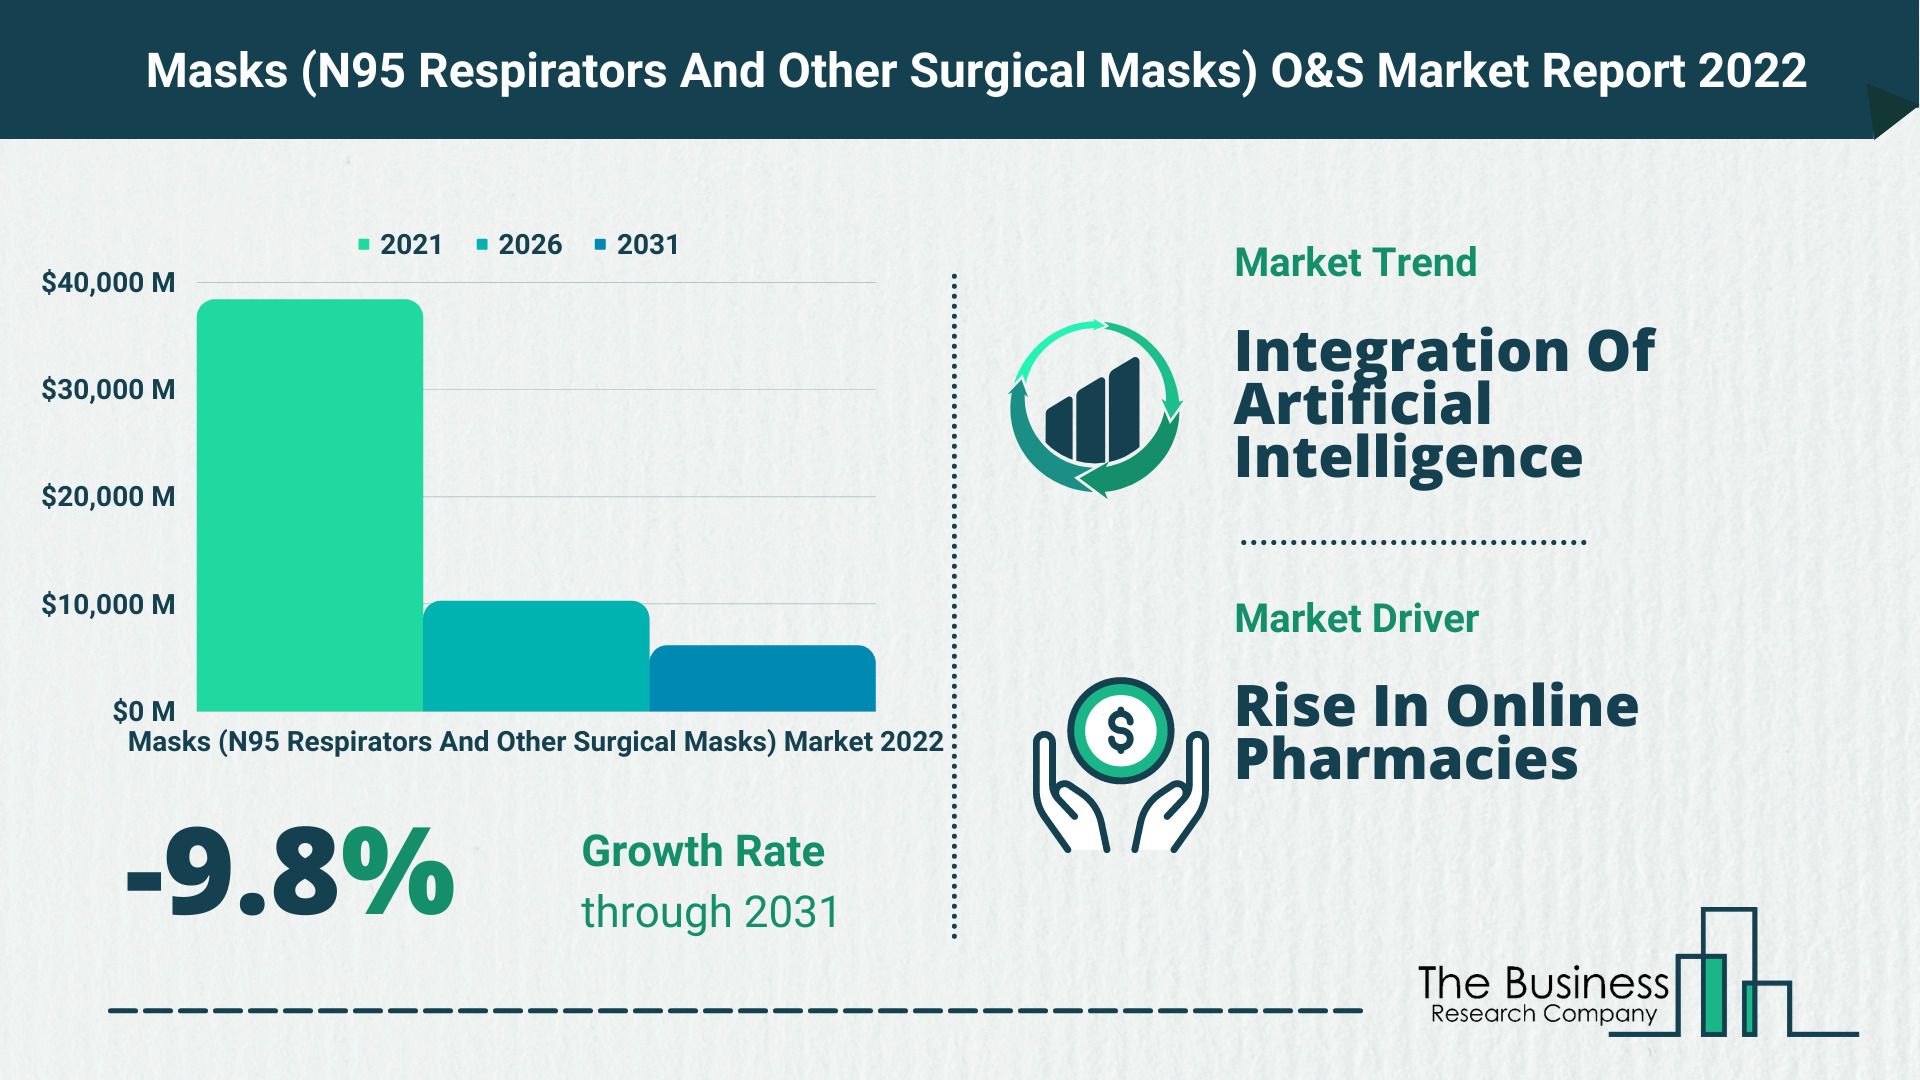 The Masks (N95 Respirators And Other Surgical Masks) Market Forecast Until 2030 – Opportunities And Strategies